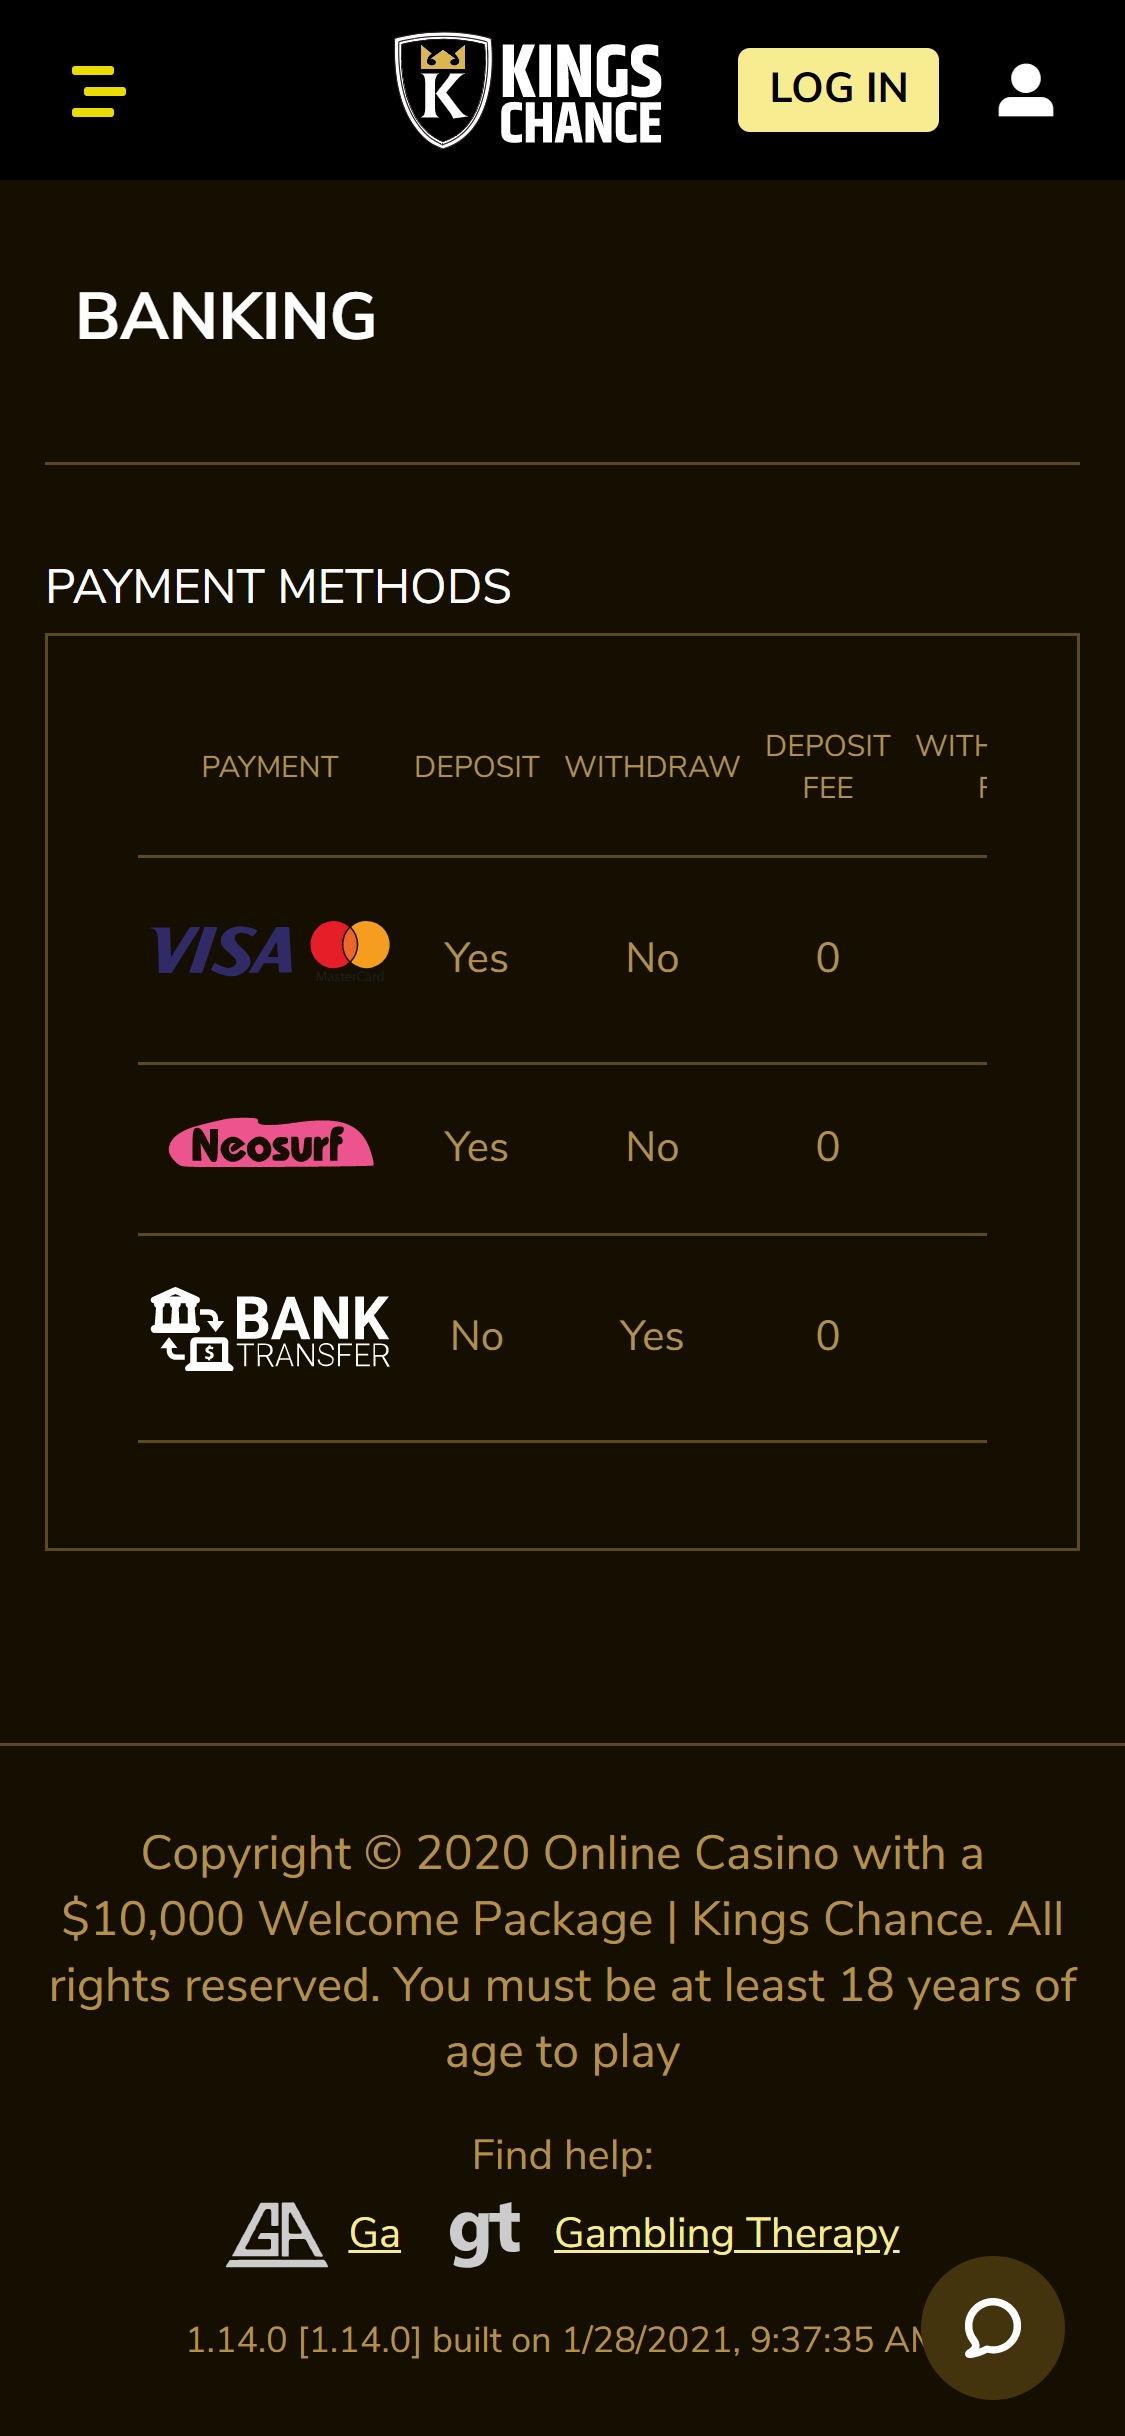 Kings Chance Casino Mobile Payment Methods Review